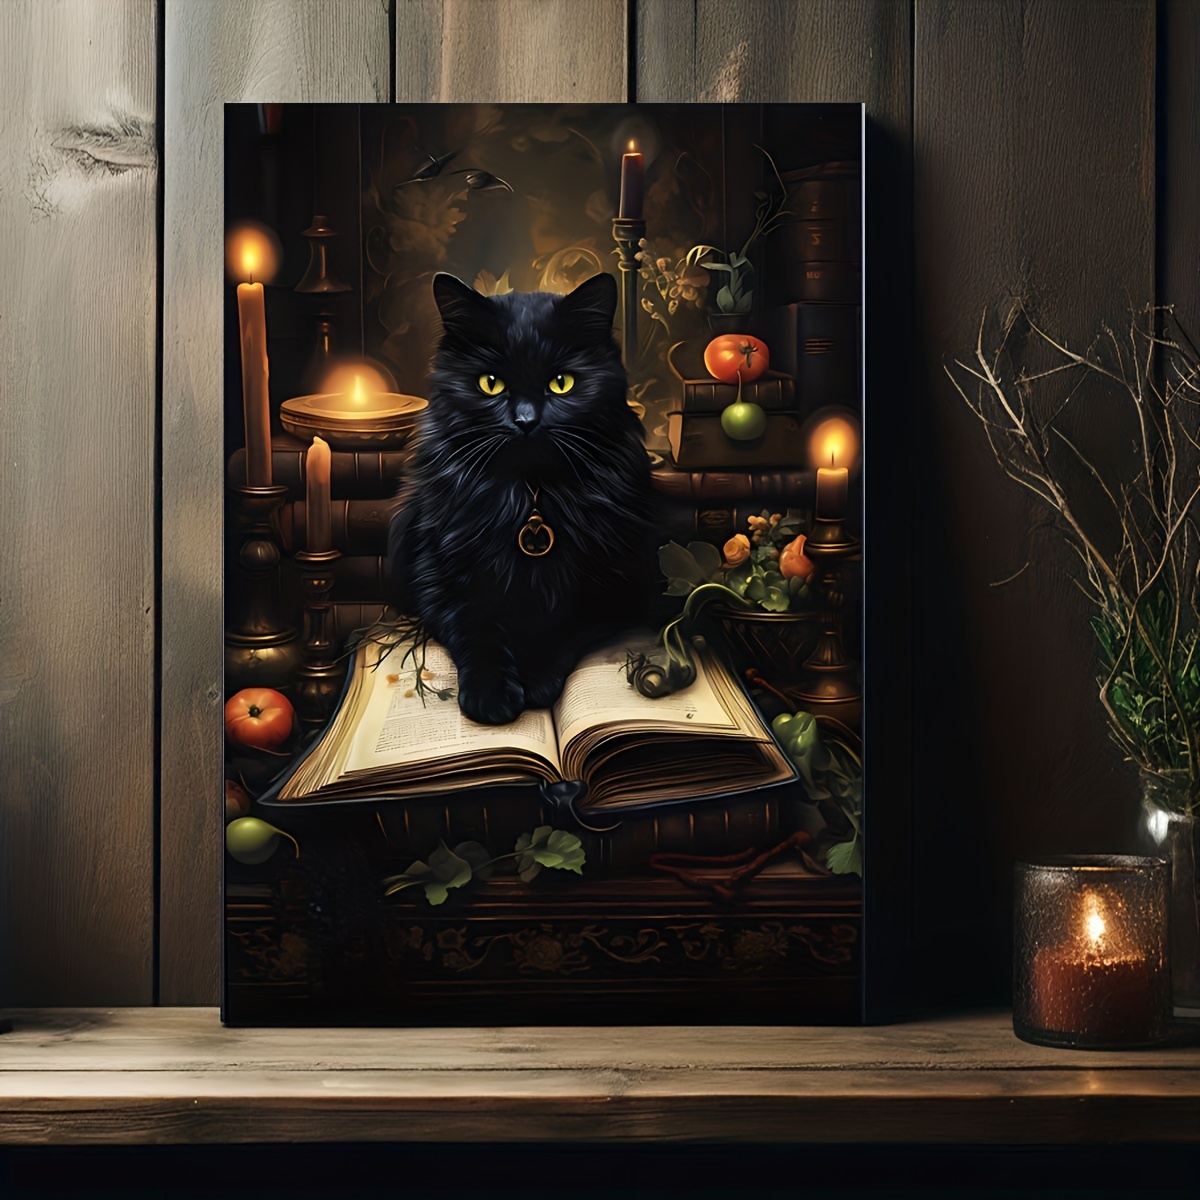 

1pc Wood Frame Canvas Painting Black Cat Print, Vintage Poster, Art Poster Print, Ideal Gift For Bedroom Living Room, Decor Wall Art, Wall Decorwall Decor, Room Decoration, 11.8inx15.7inch